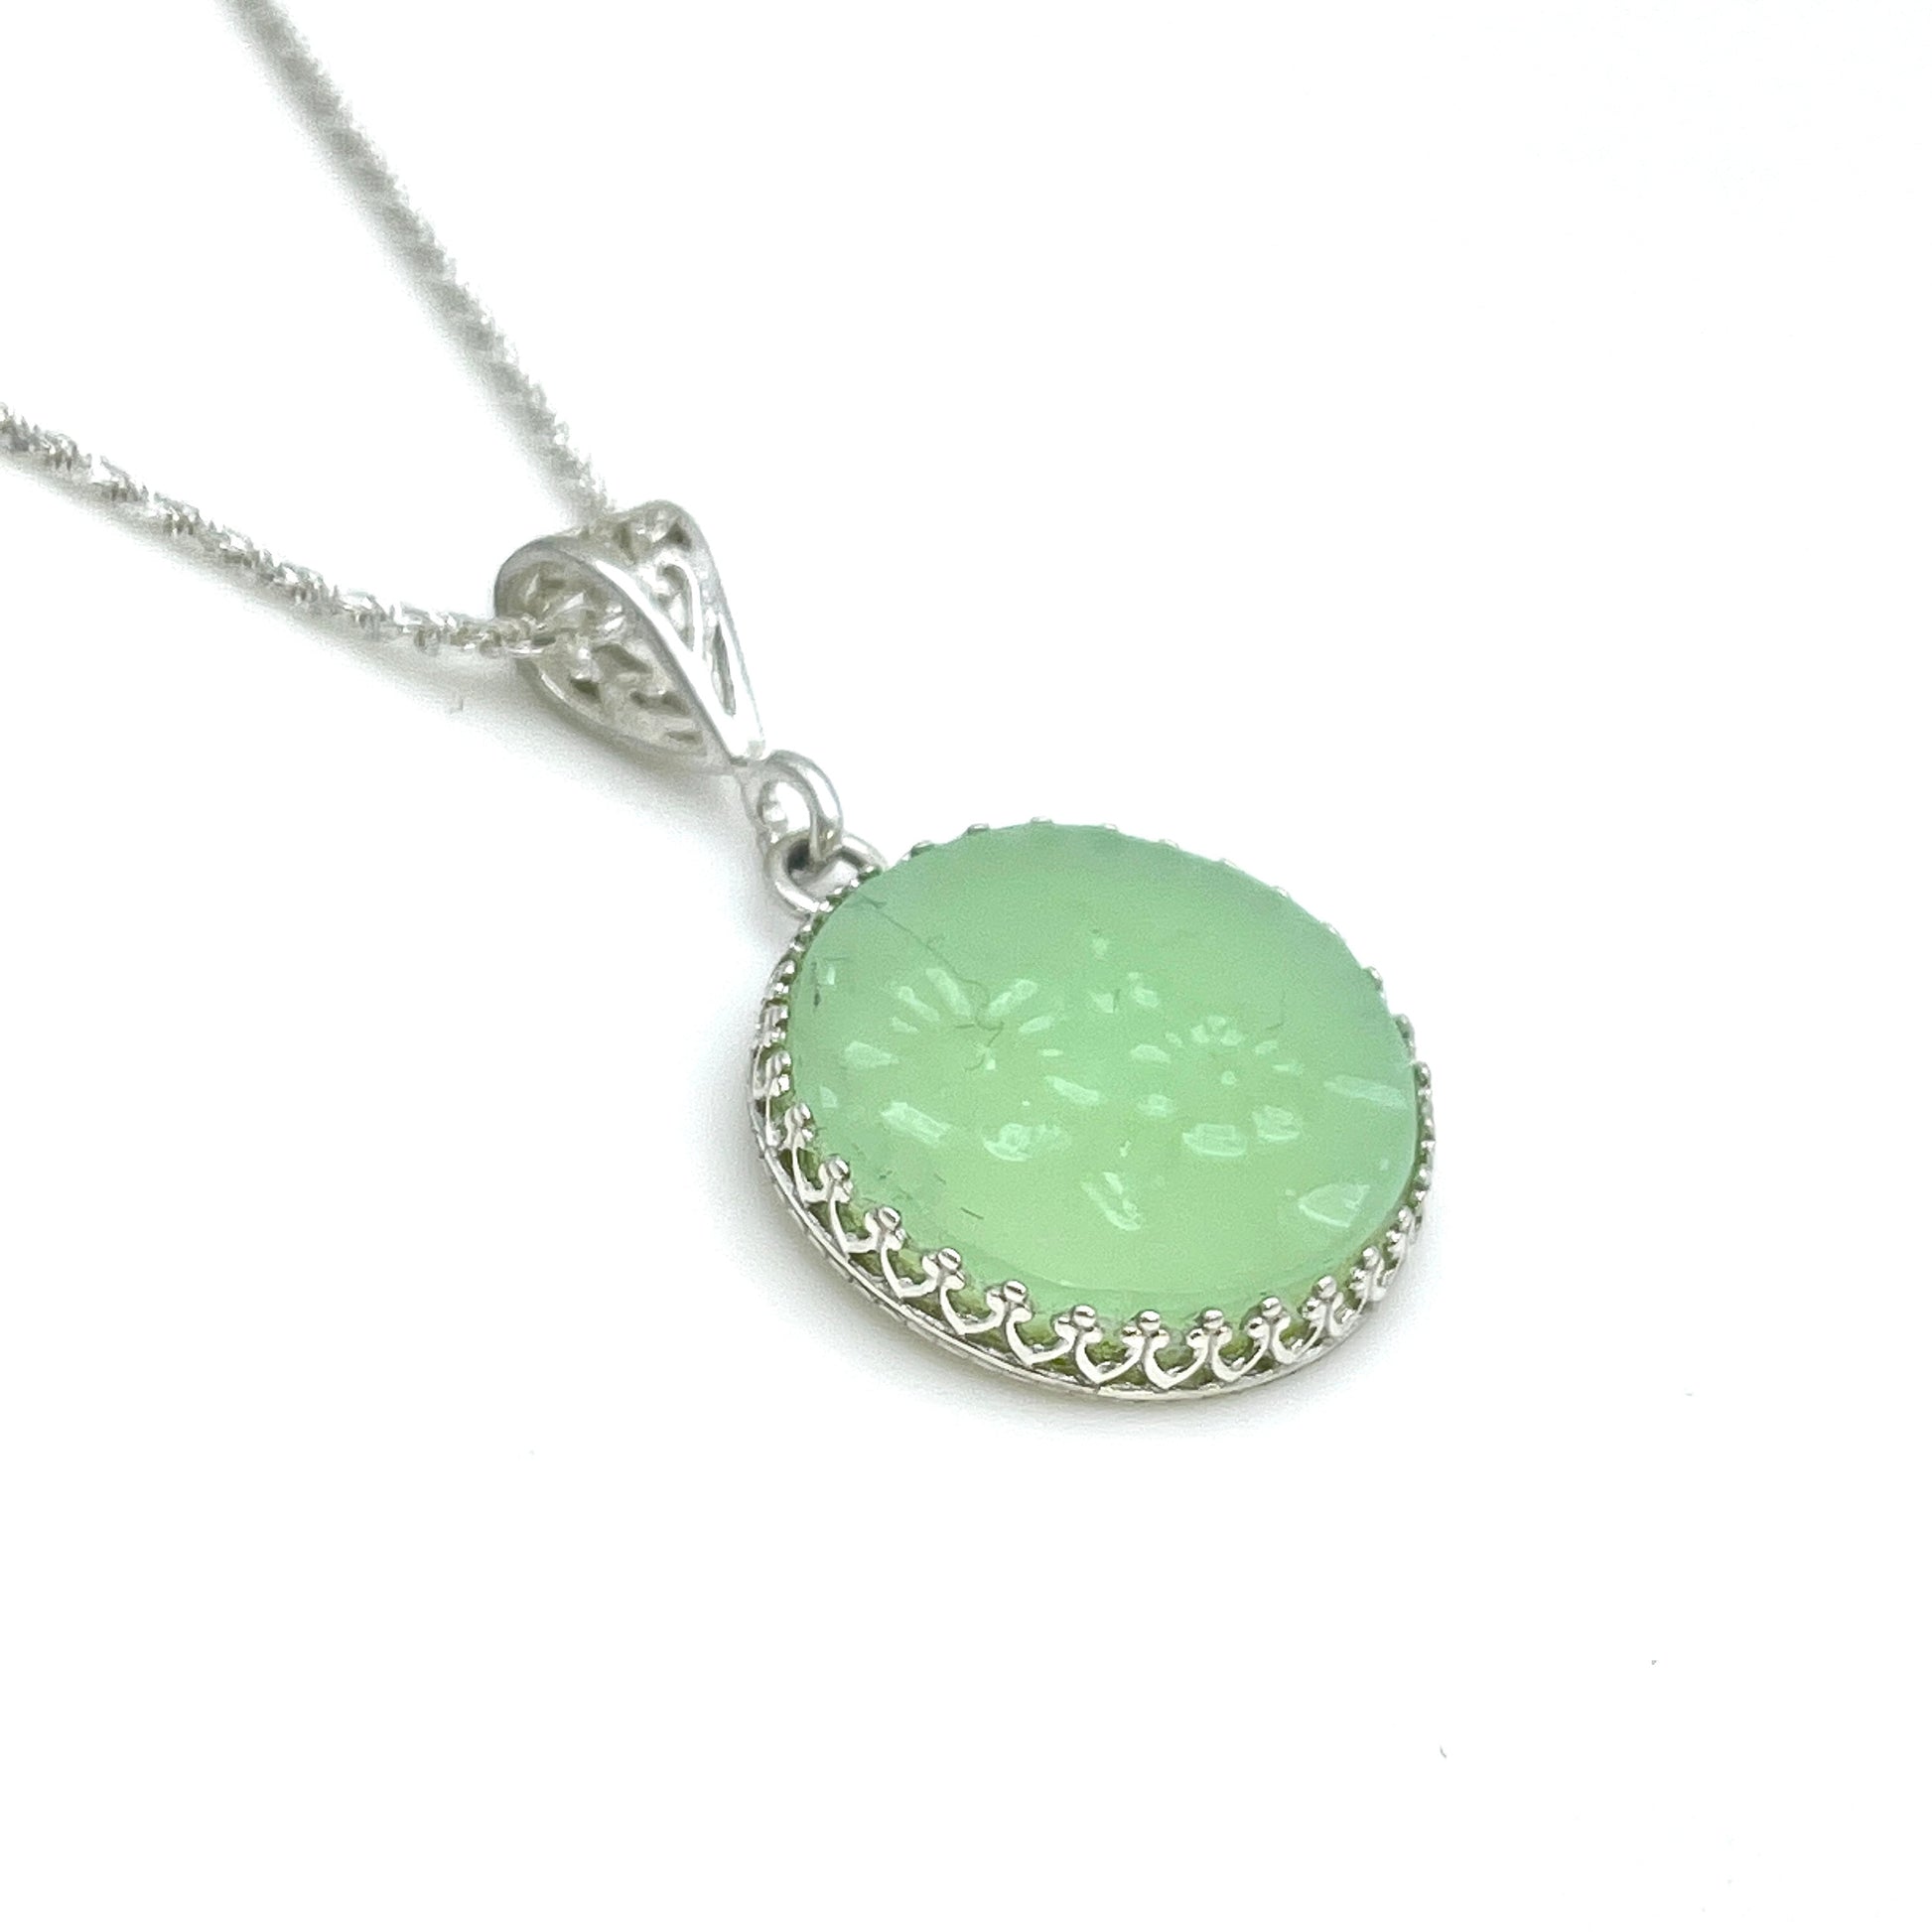 Fire King Alice Jadeite Jewelry Necklace, Sterling Silver, Unique Gift for Women, Broken China Jewelry, Mid Century